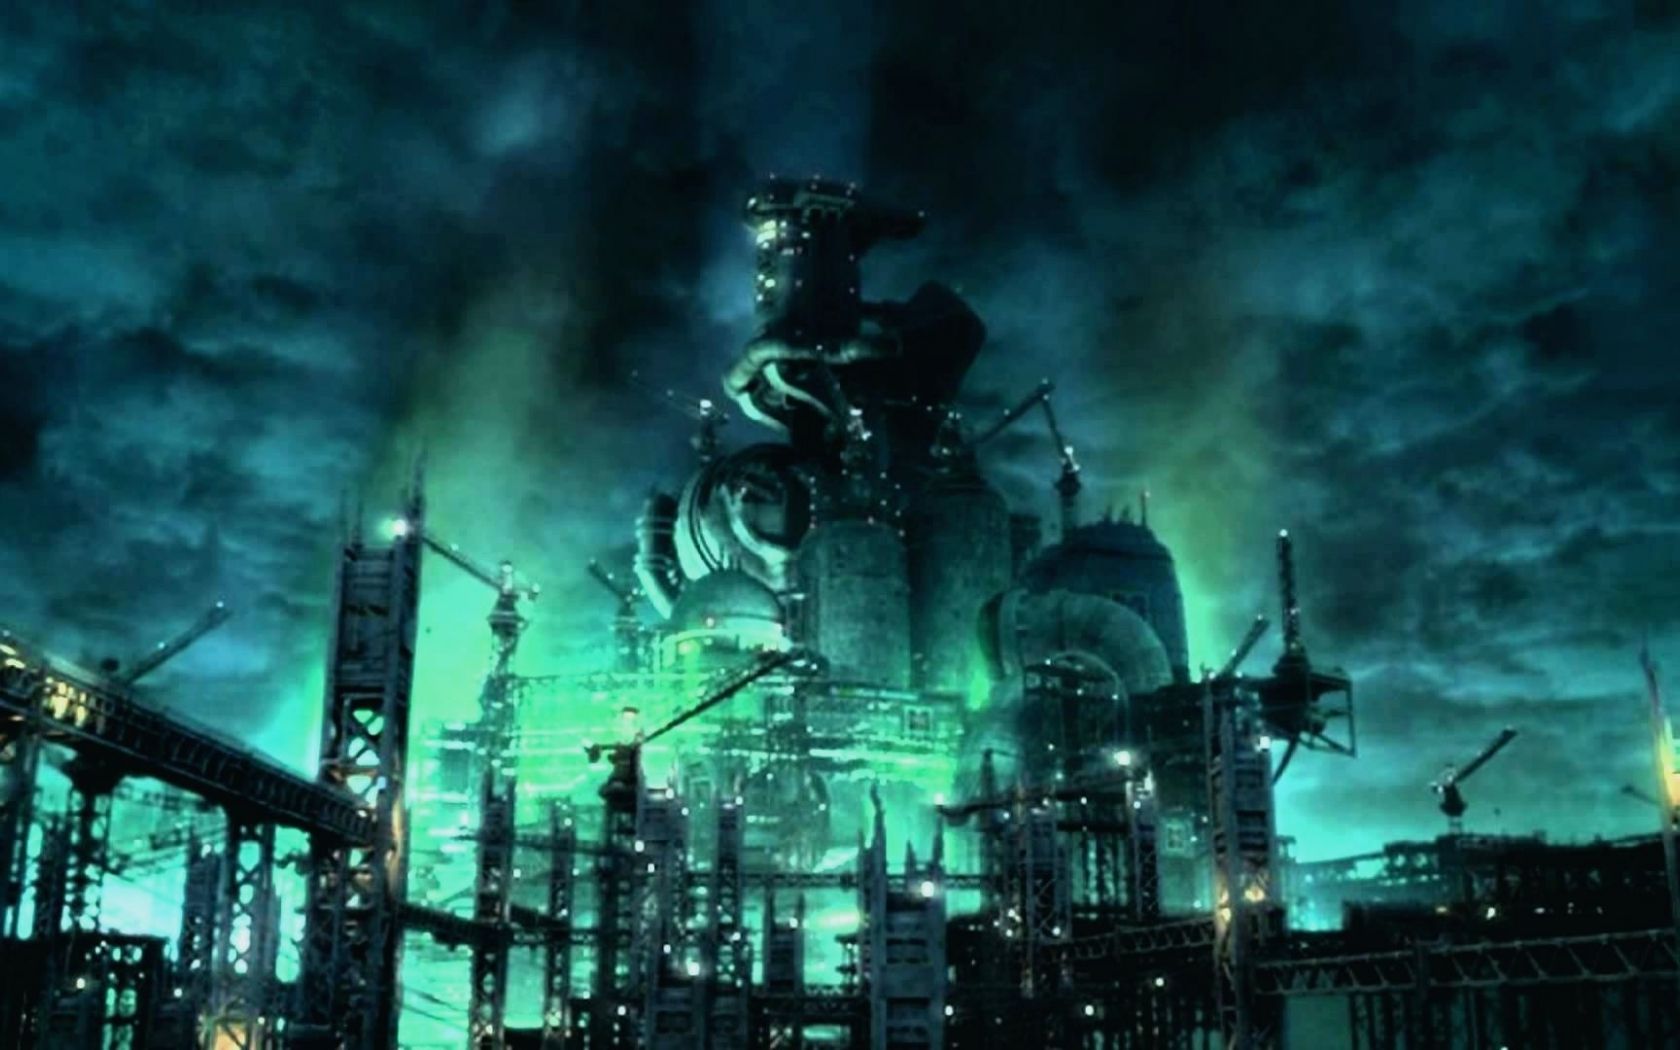 Free download Final Fantasy VII Wallpapers HD Download 1920x1080.